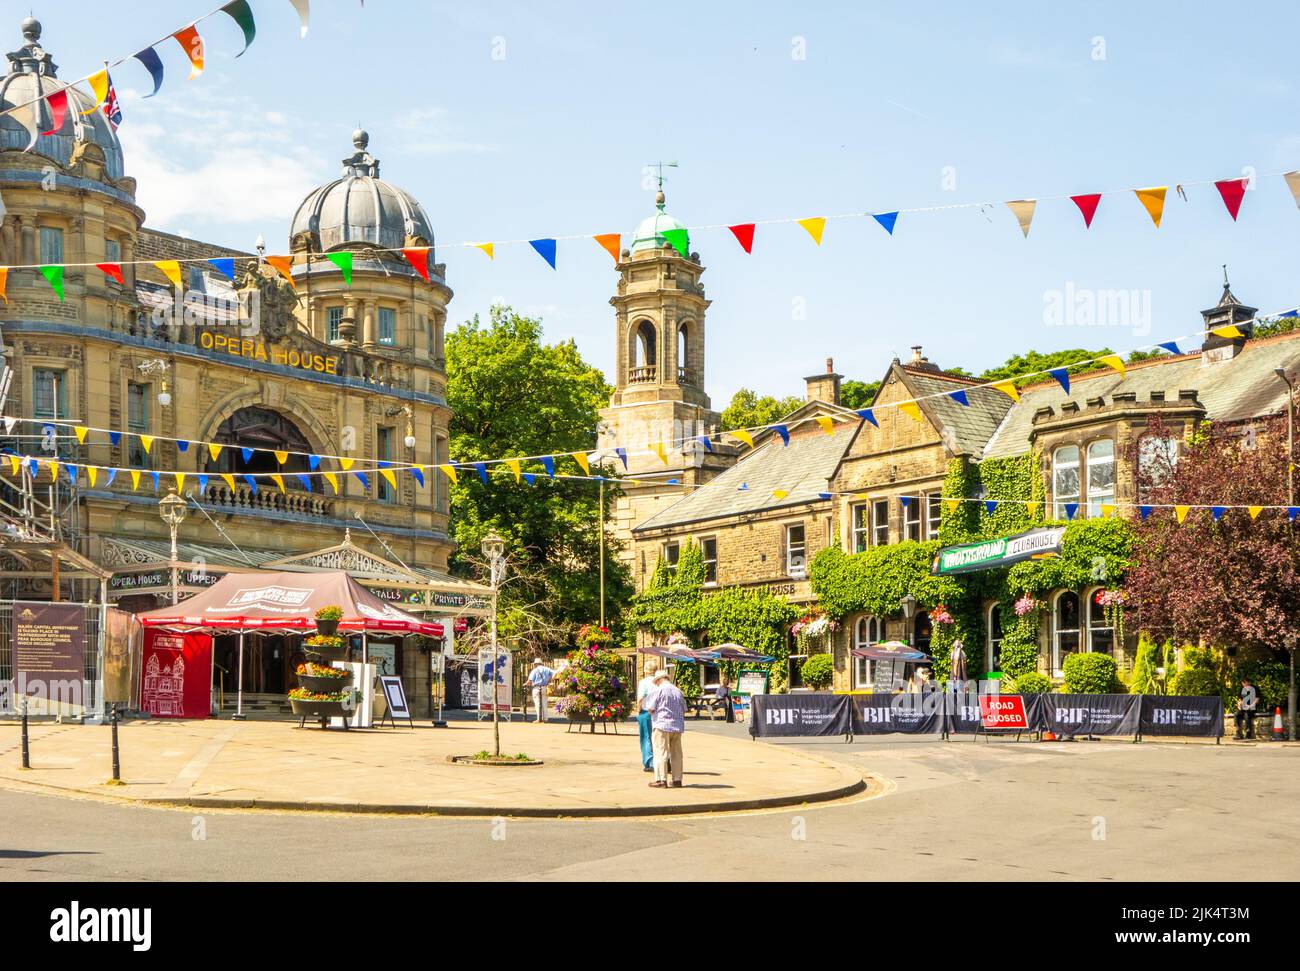 The Derbyshire town of Buxton in the English Peak District England Stock Photo